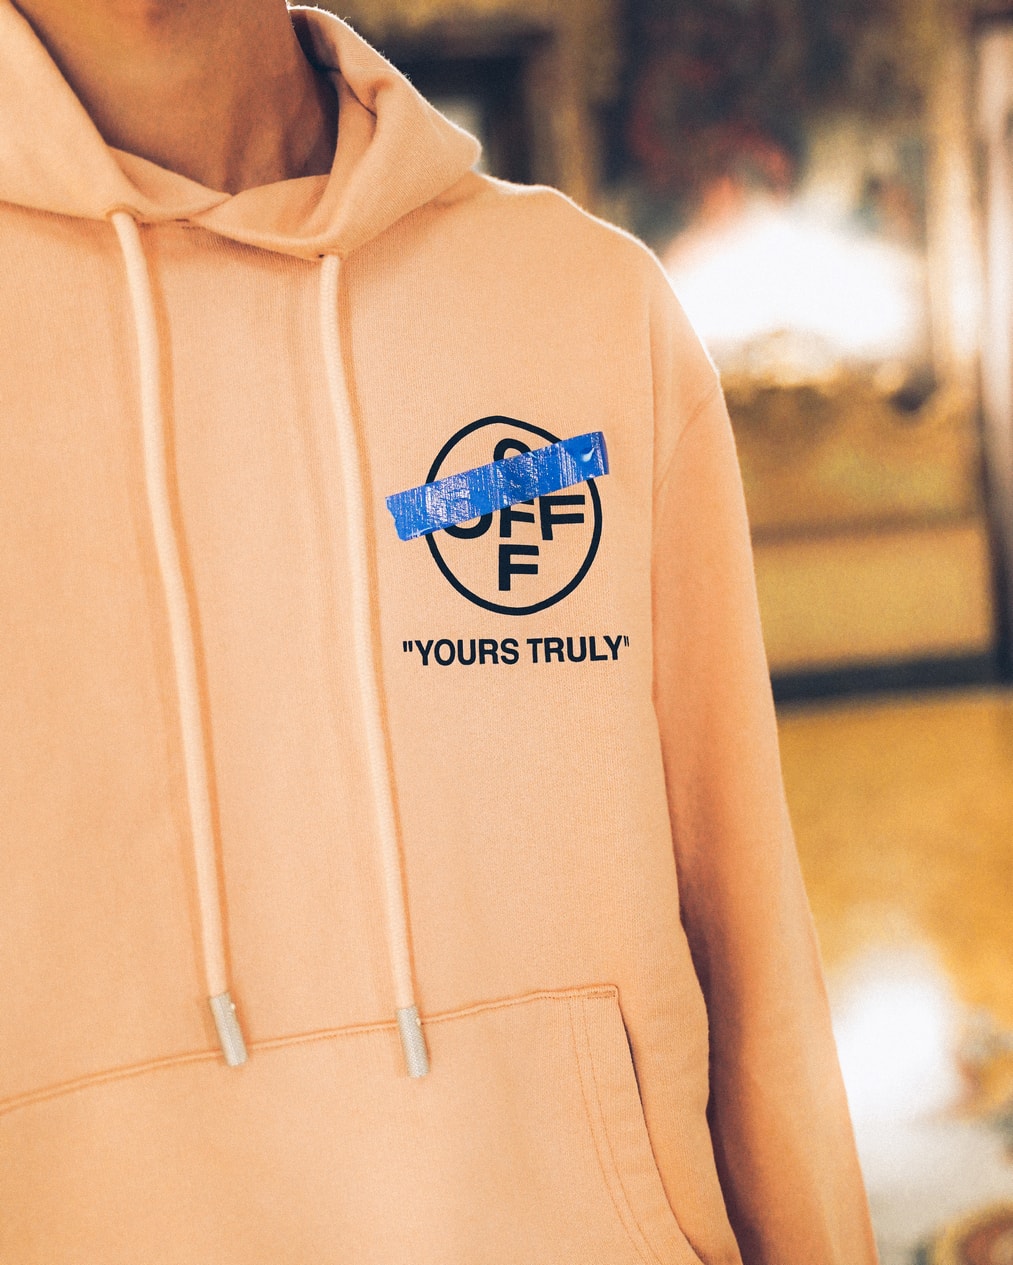 Off-White™ ”YOURS TRULY“ 獨家別注系列台灣發售情報公開